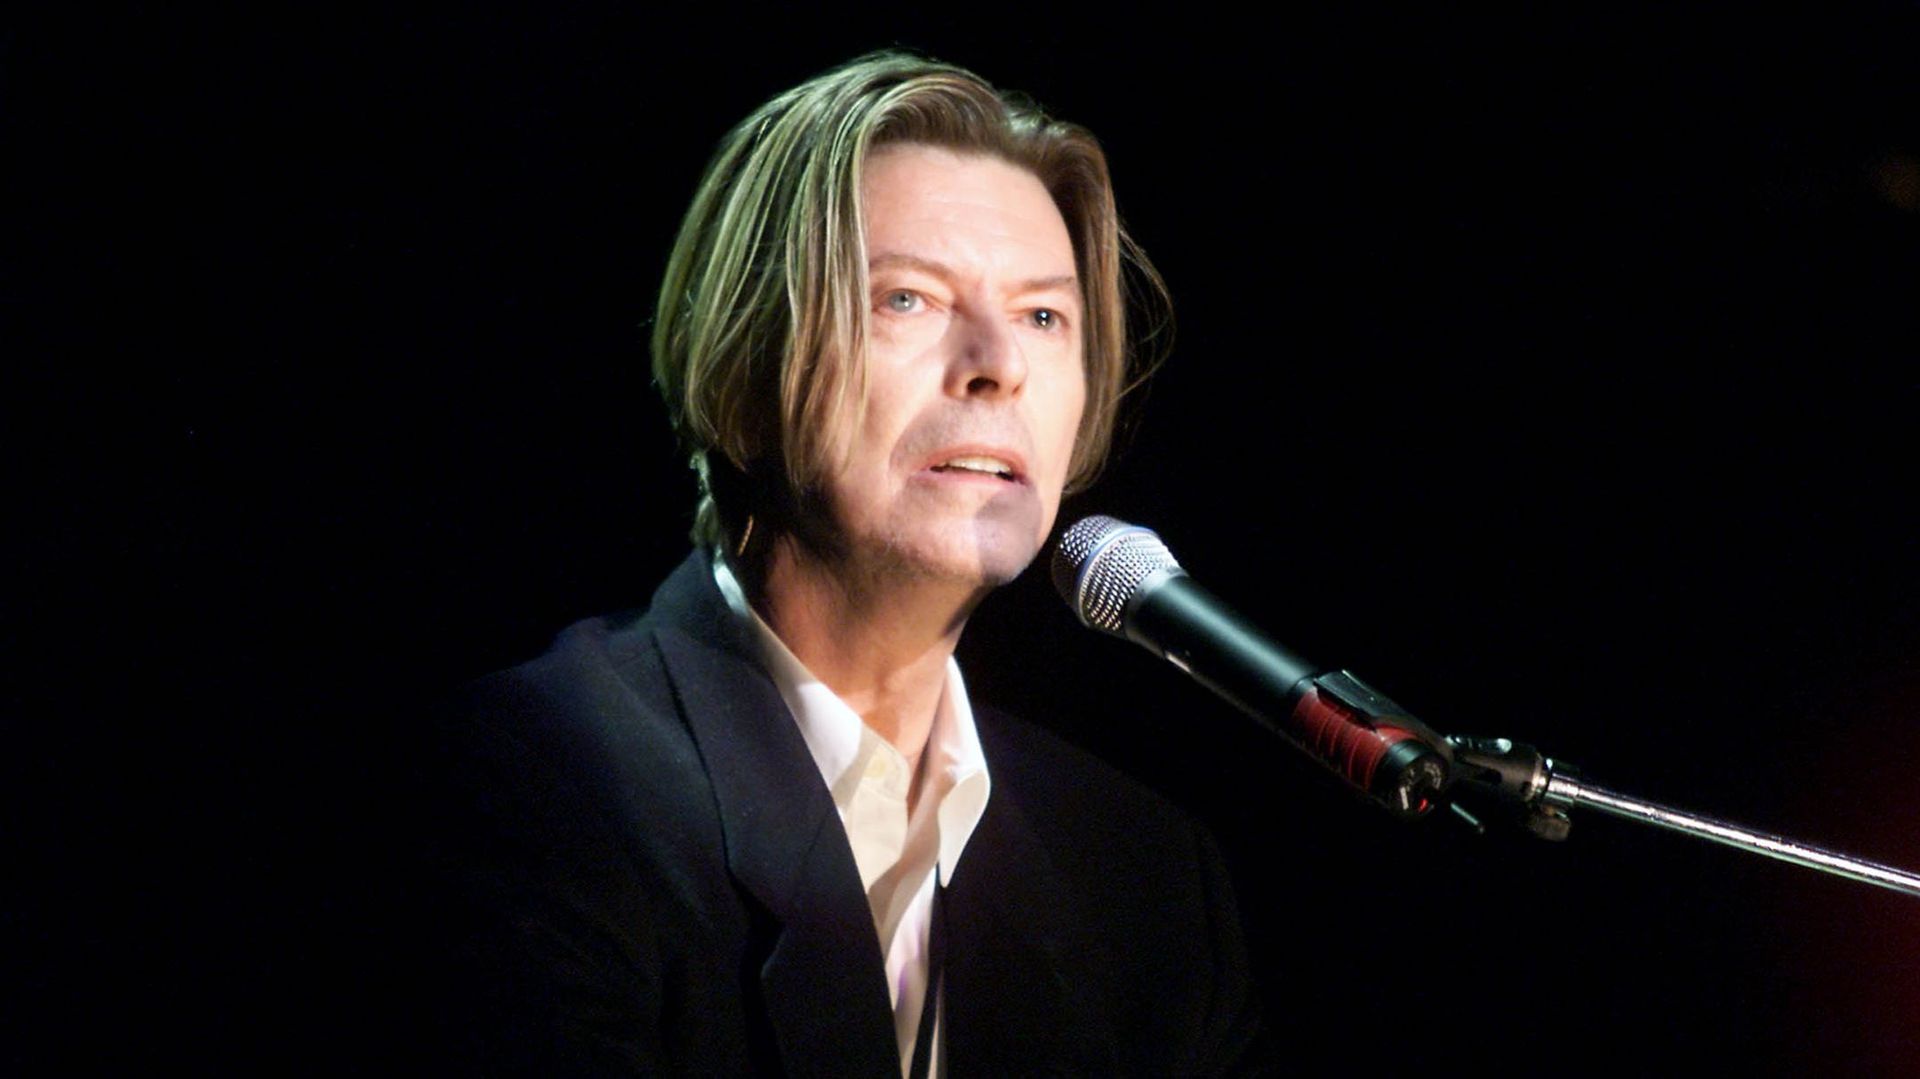 david-bowie-chante-cant-help-thinking-about-me-dans-une-video-inedite